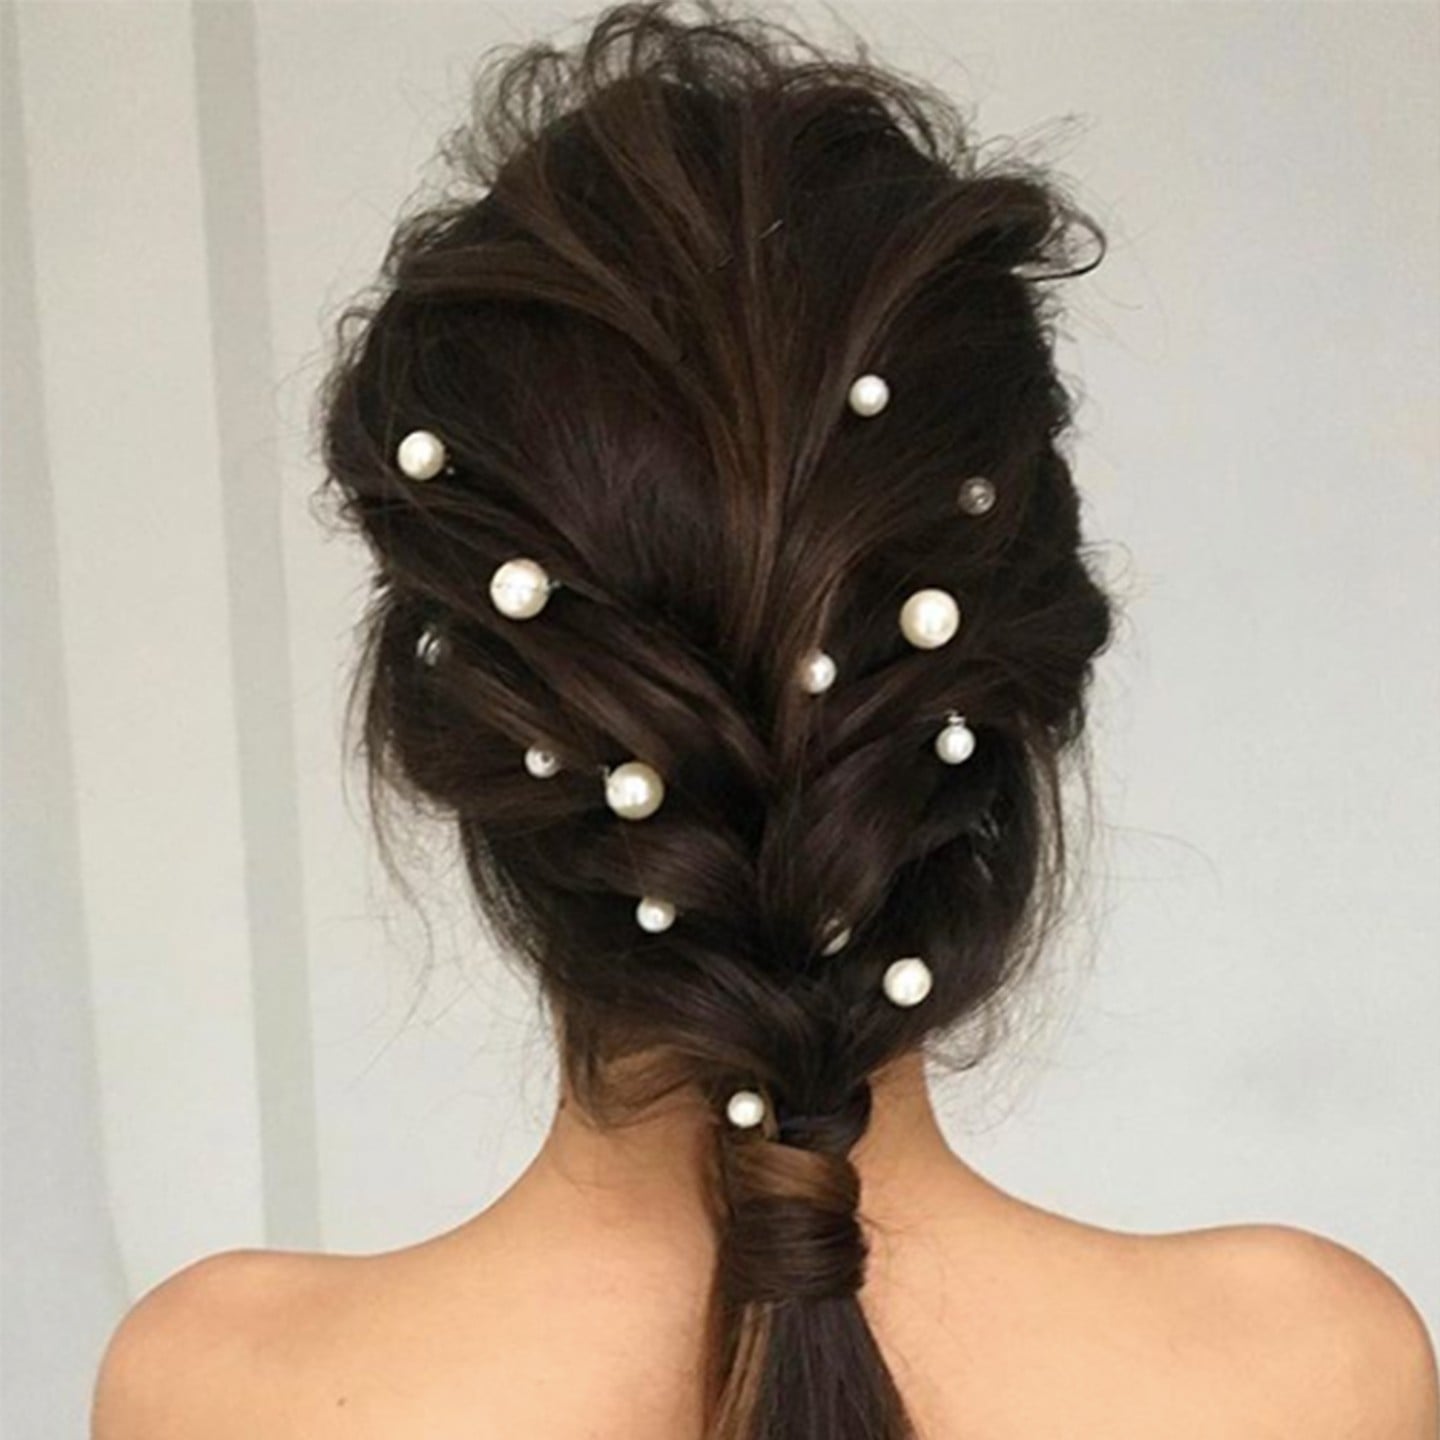 29 Prom Hairstyle Ideas to Try This Year | POPSUGAR Beauty